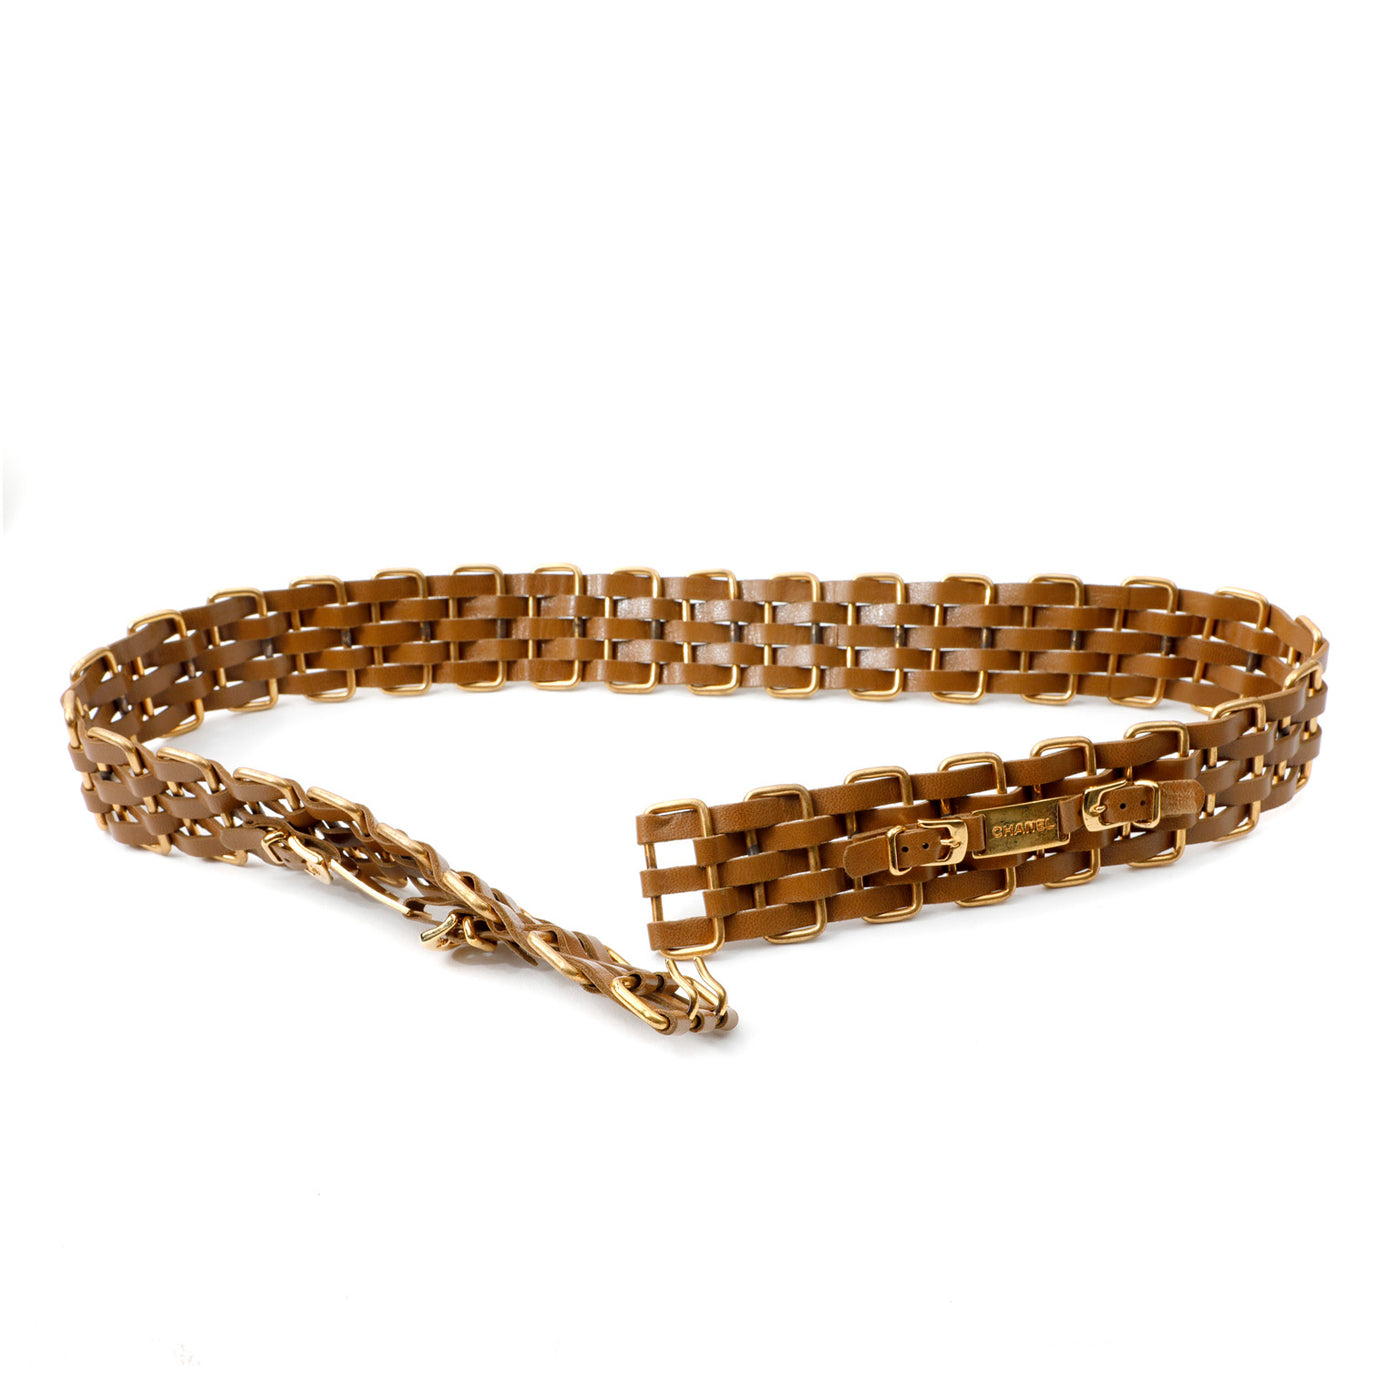 Chanel Brown Woven Leather Belt w/ Gold Chanel Buckle